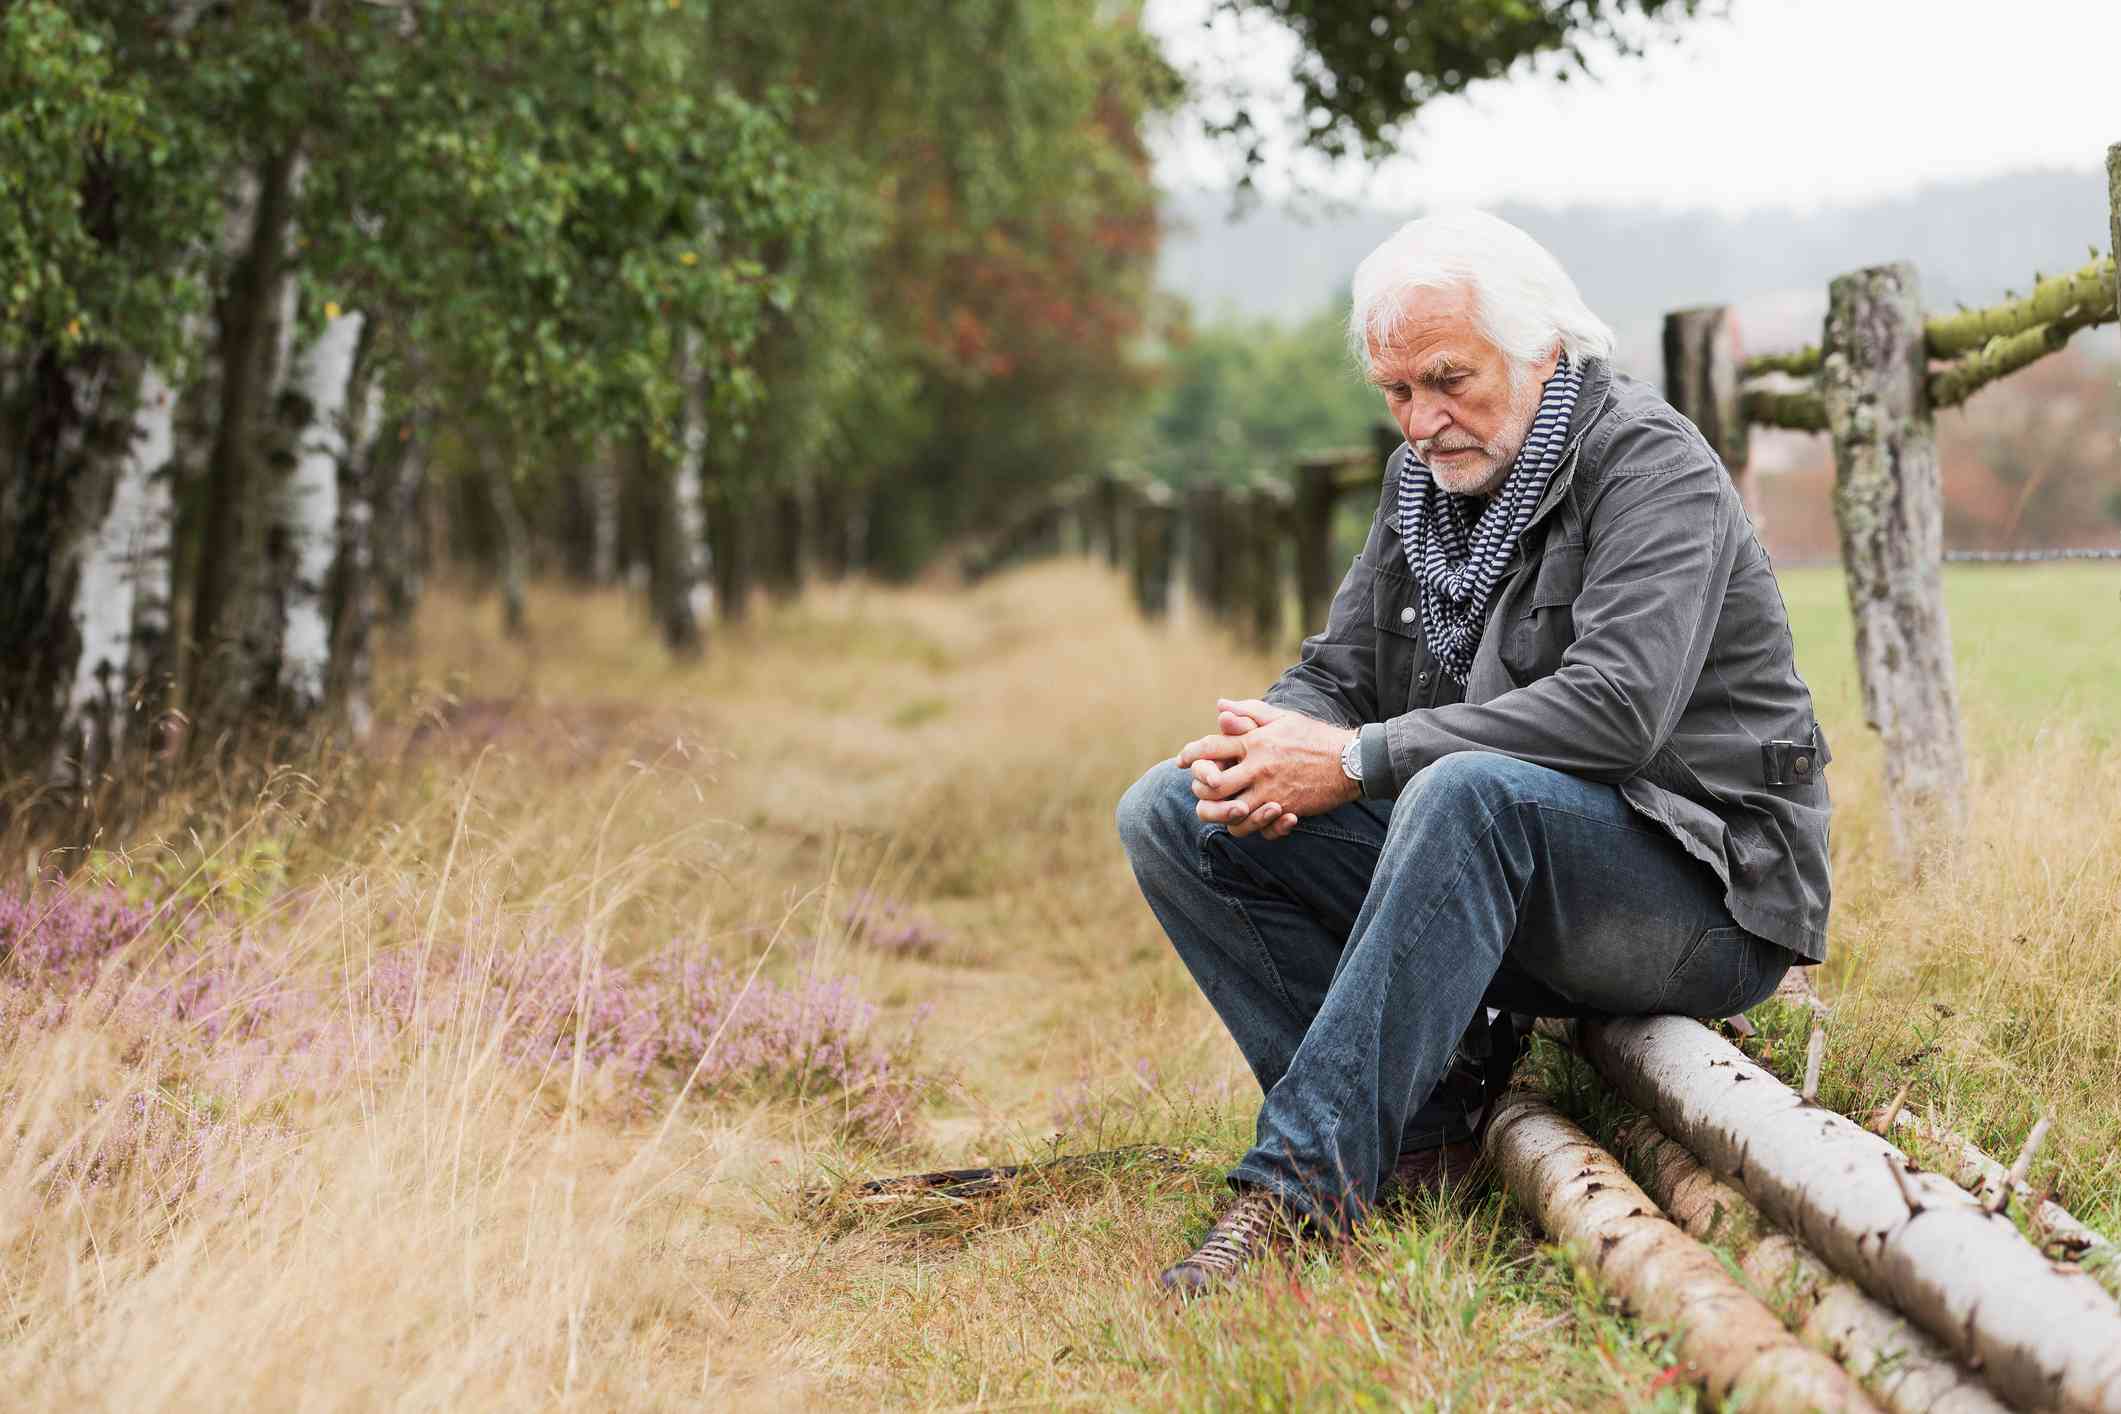 An elderly man sits outside on a pile of logs while leaning forward with his hands clasped together and a sad expression on his face.